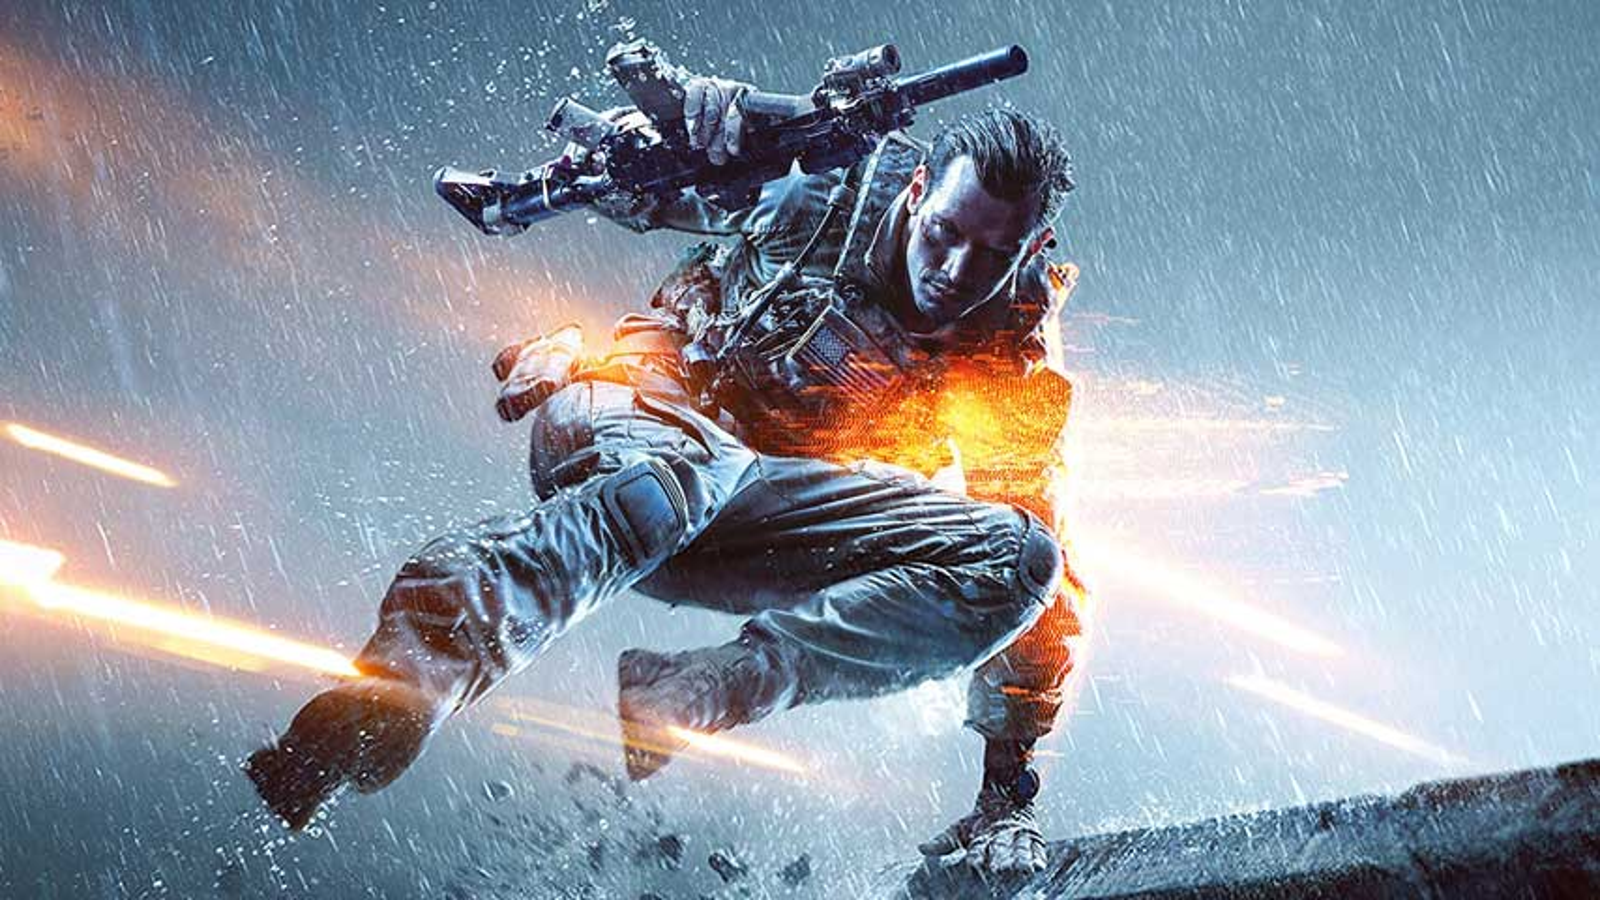 Battlefield 4 servers have been upgraded ahead of the launch of Battlefield  2042